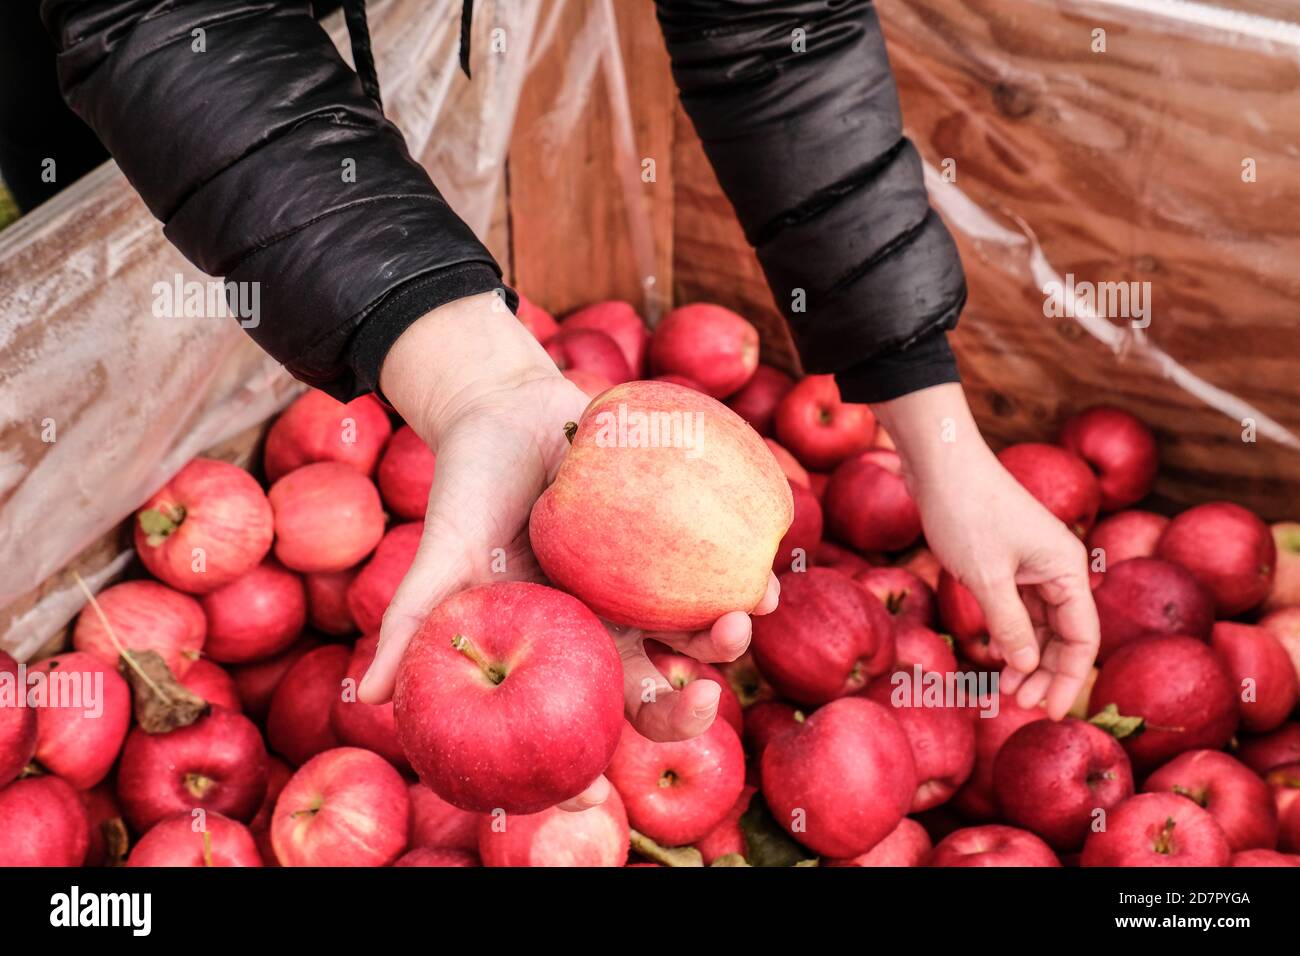 Woman picking up freshly picked gala apples at roadside fruit stand Stock Photo